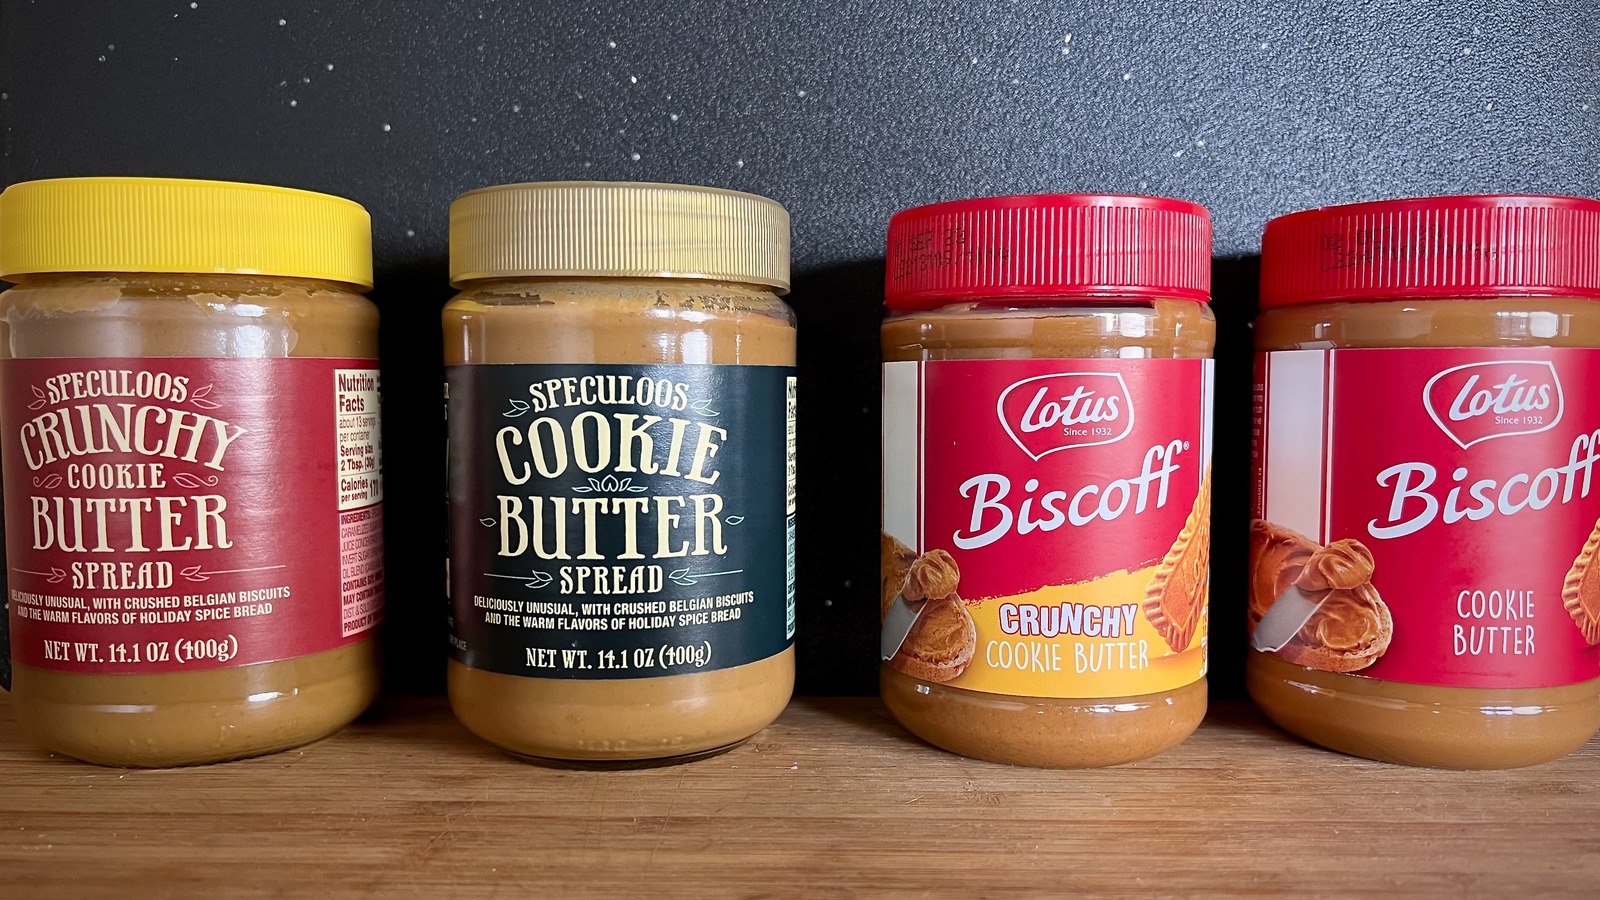 Trader Joe's Speculoos Vs. Lotus Biscoff: The Battle For The